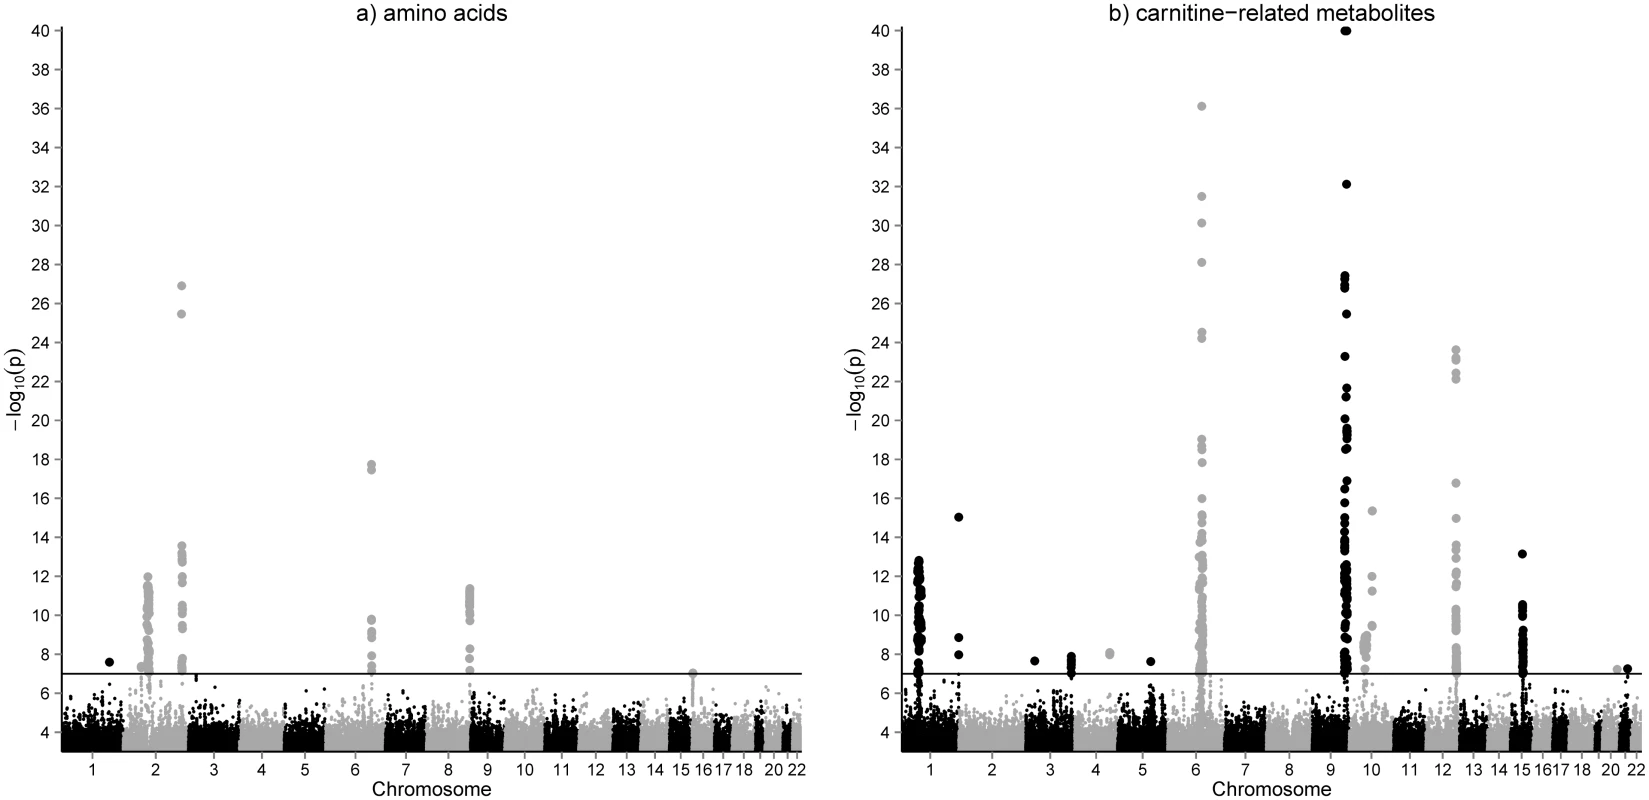 GWAS results for amino acids (a) and acylcarnitines (b) in whole blood.